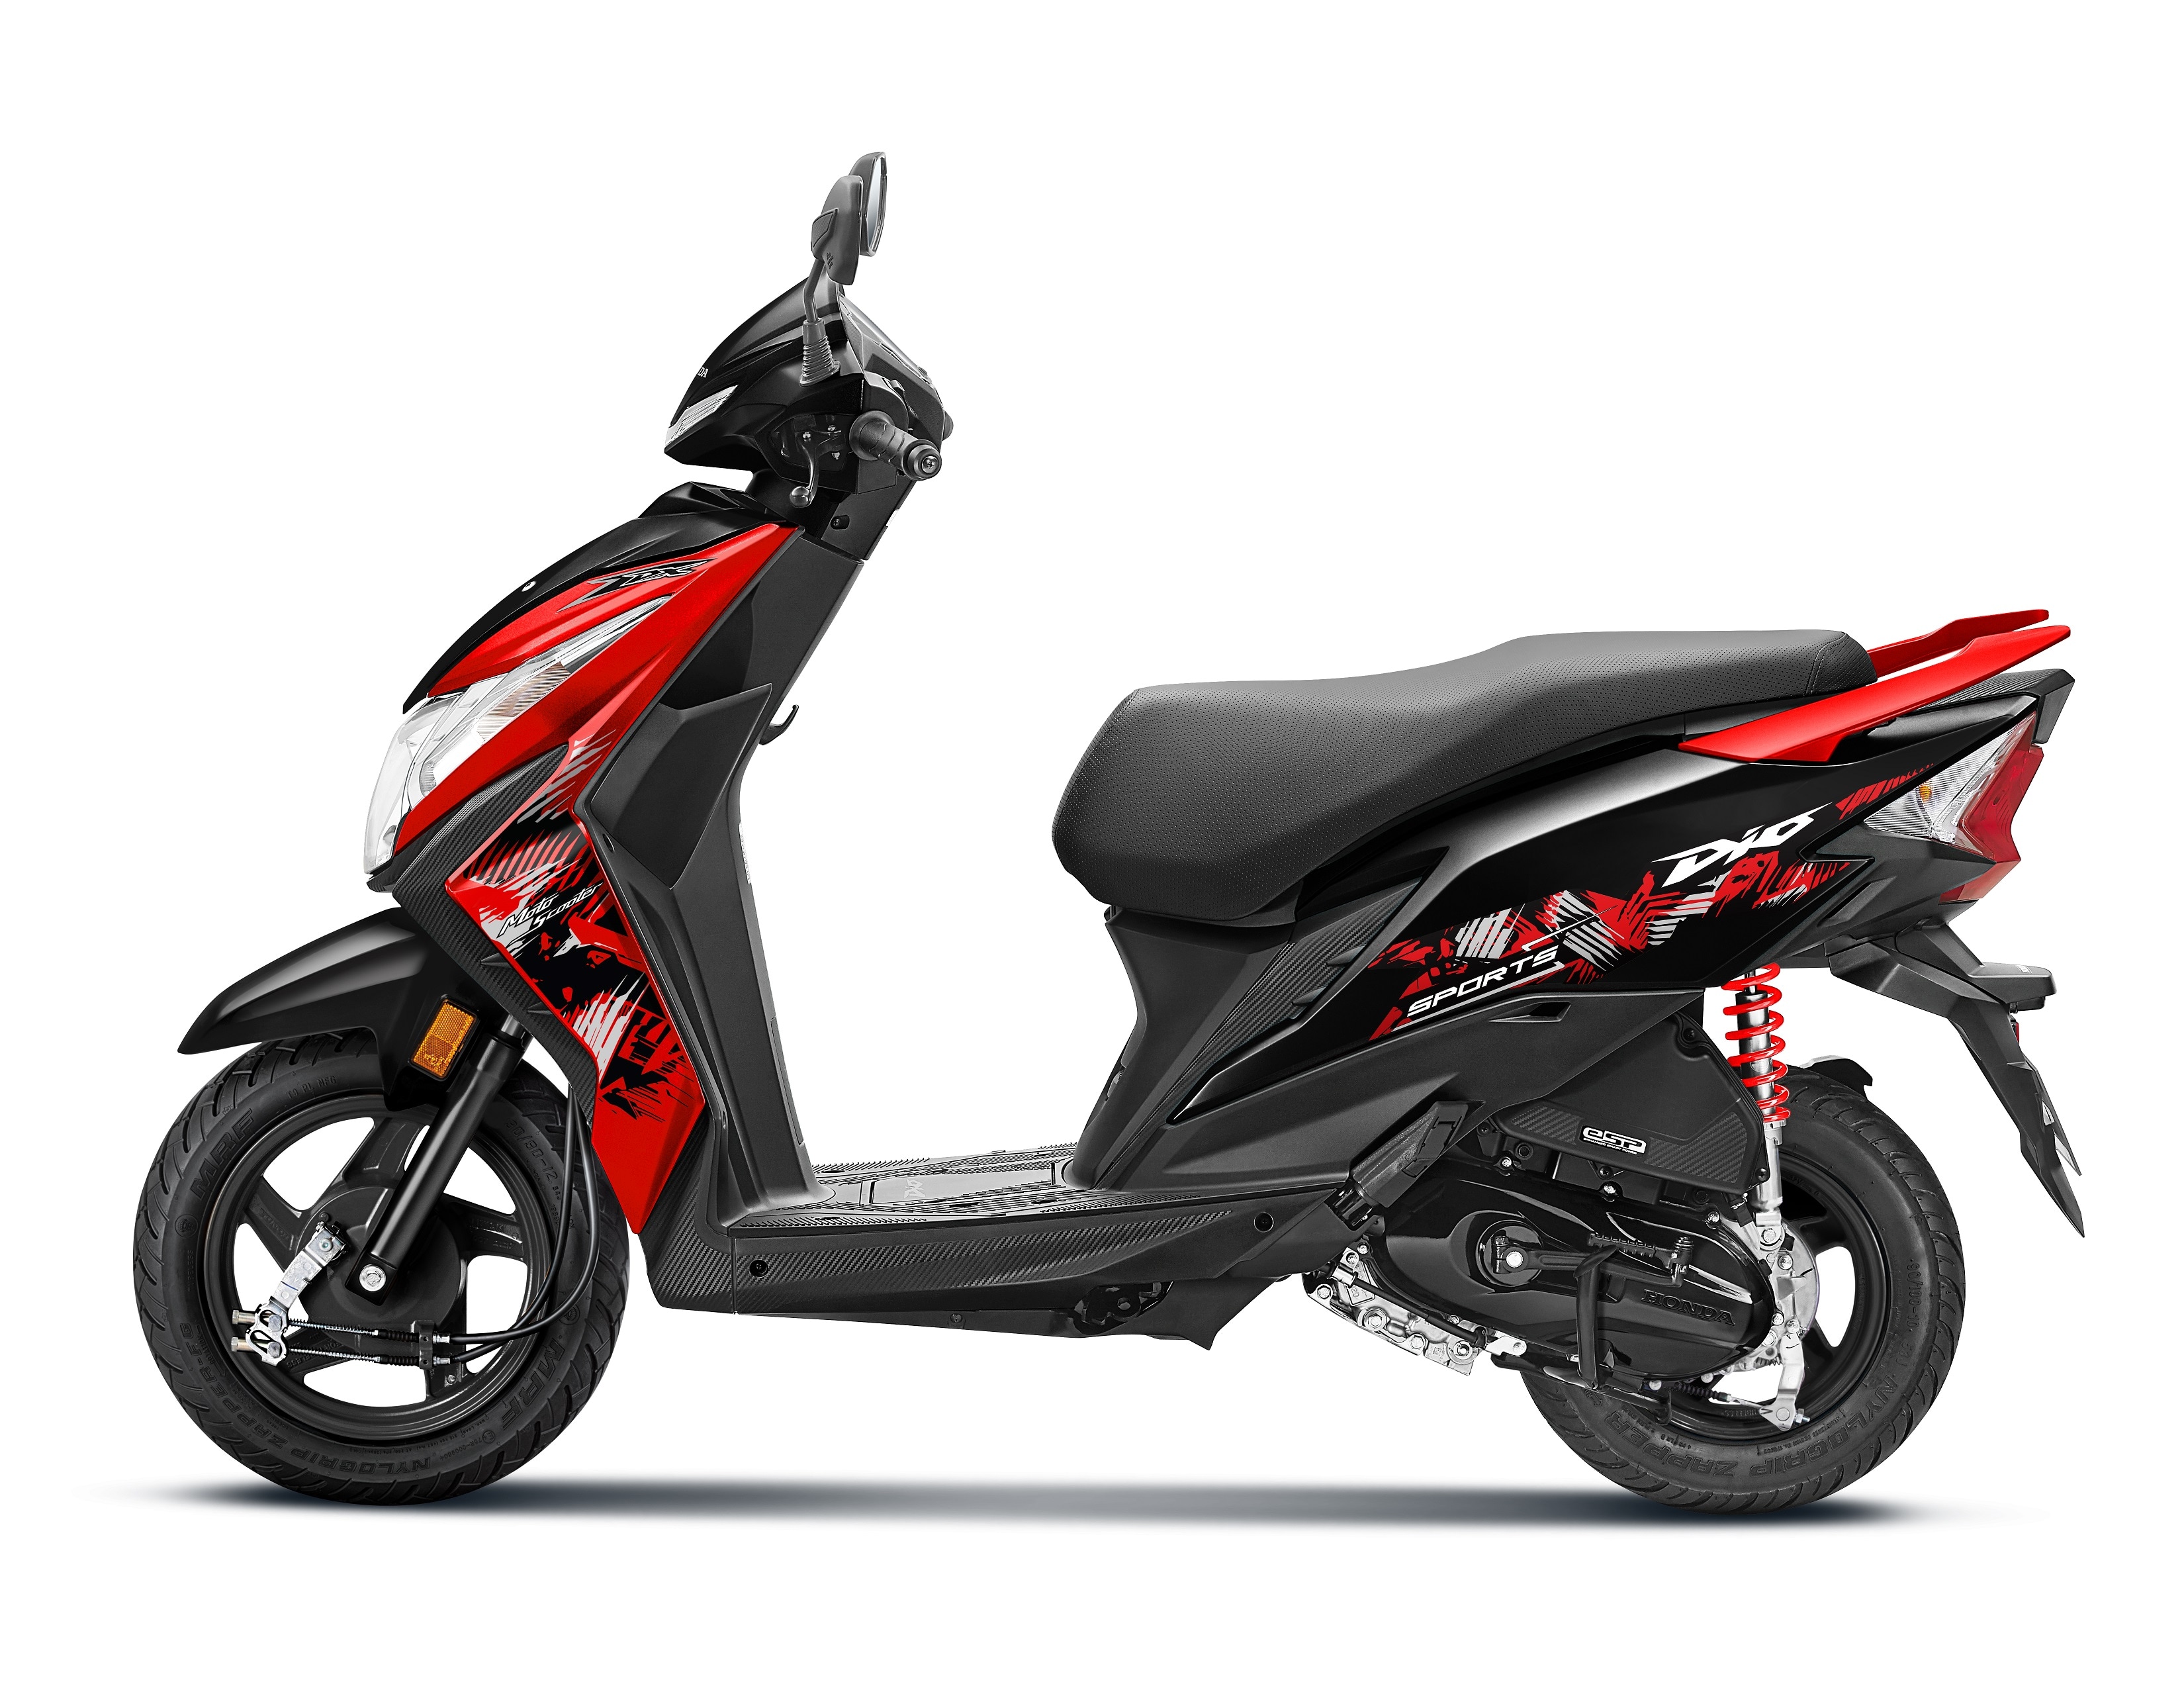 The power source for the Honda Dio Sports is a 110cc PGM-FI engine.